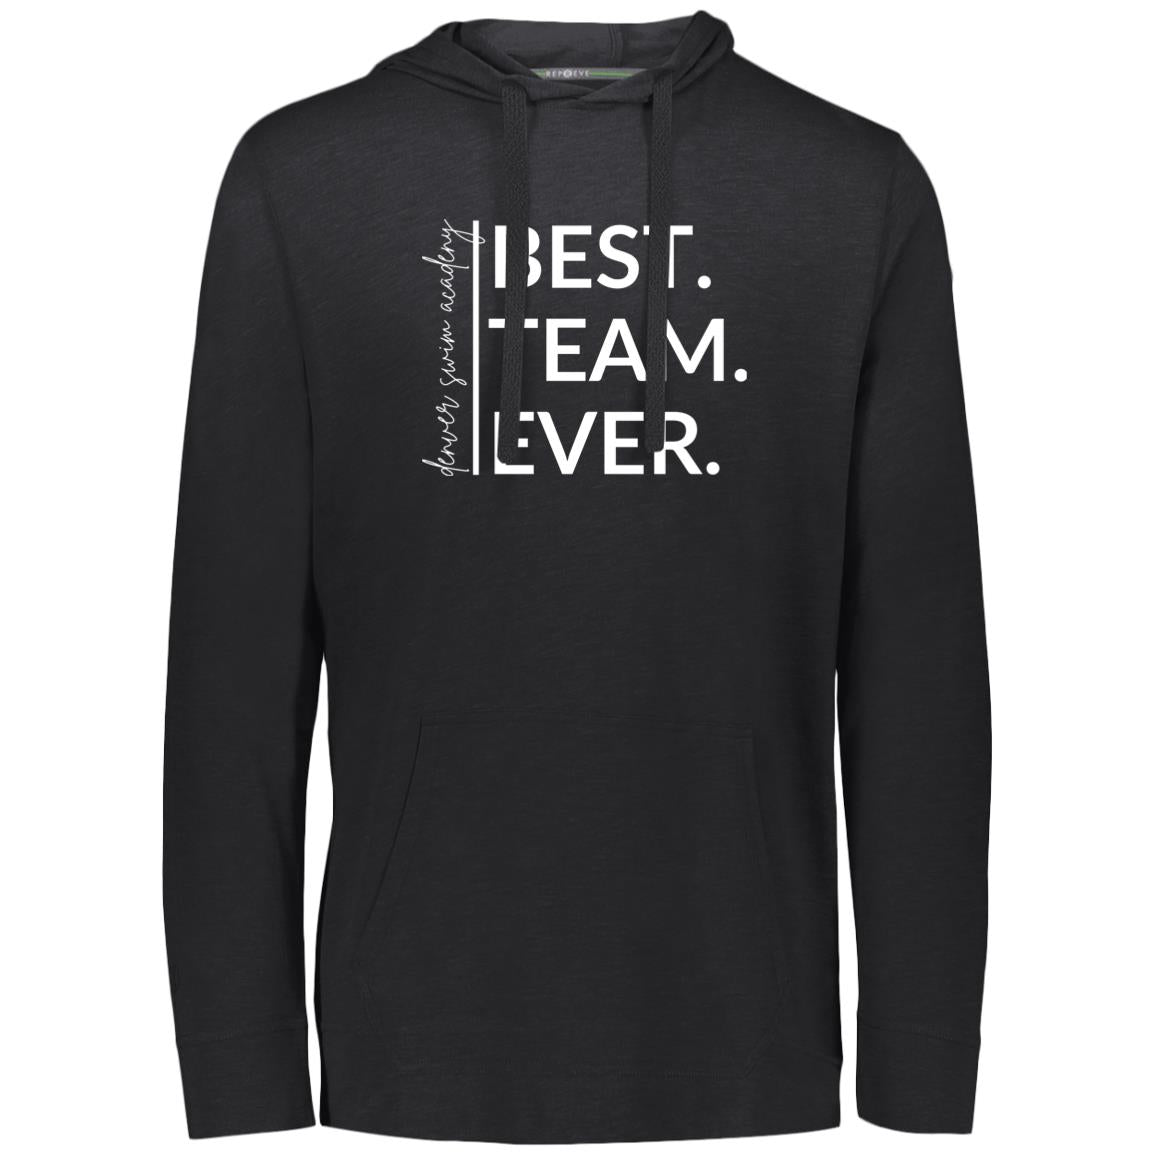 Best Team Ever Eco T-Shirt Hoodie- The Comfy